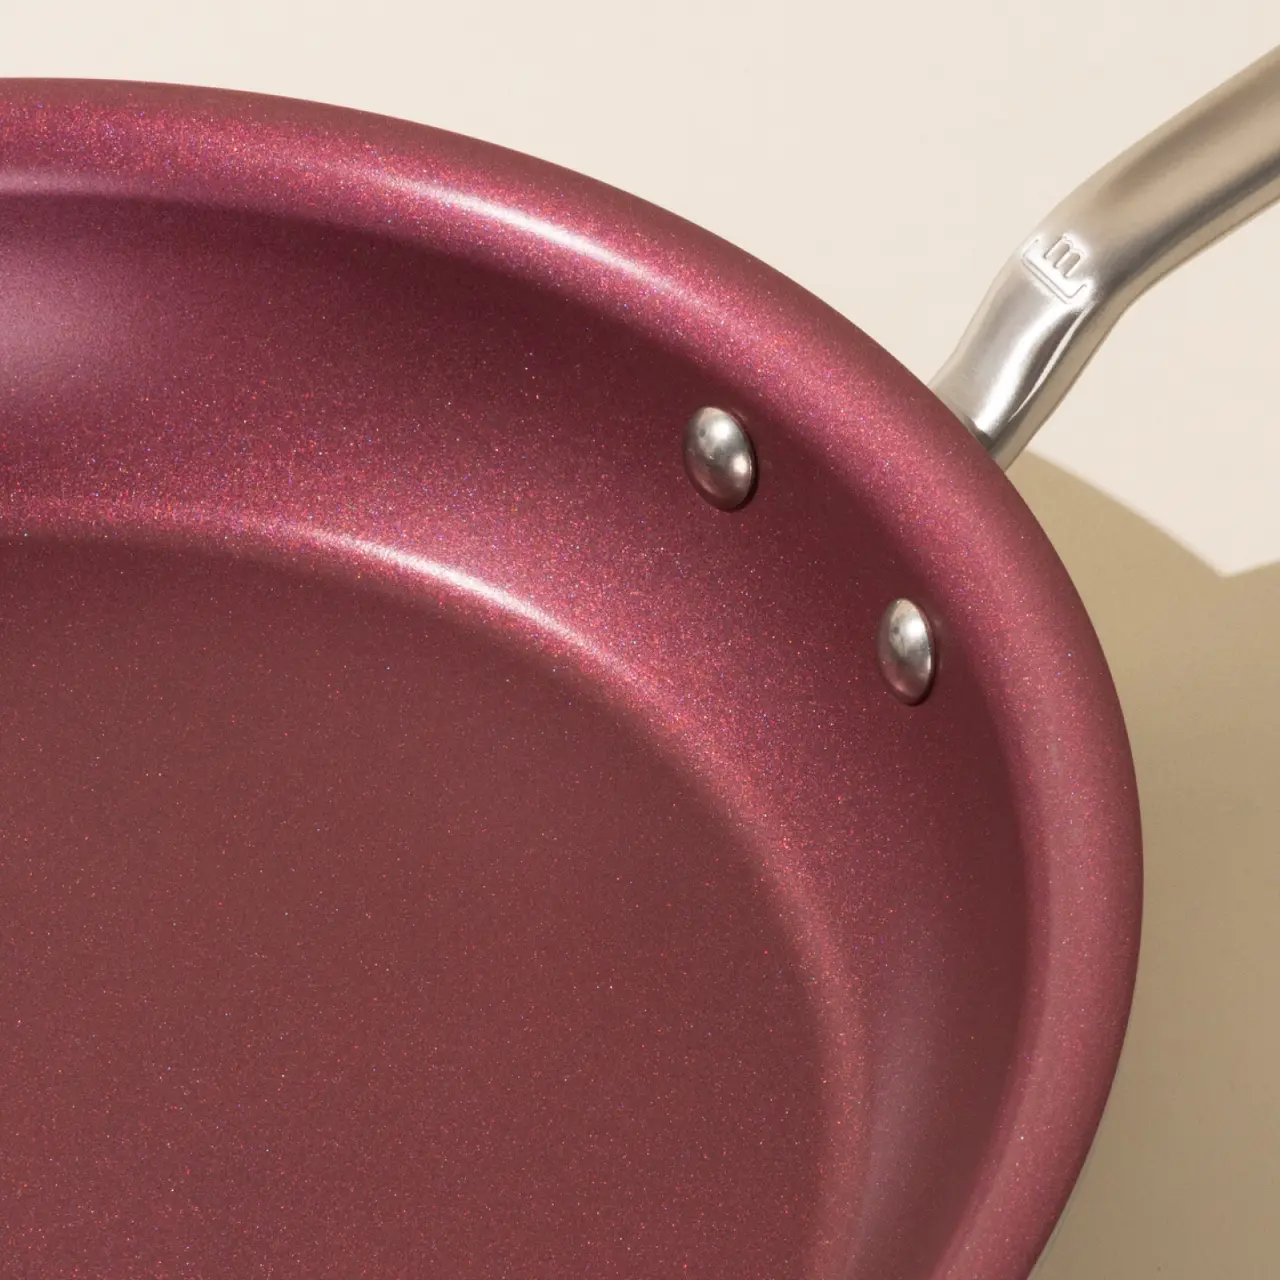 Close-up of a maroon non-stick frying pan with a silver handle.